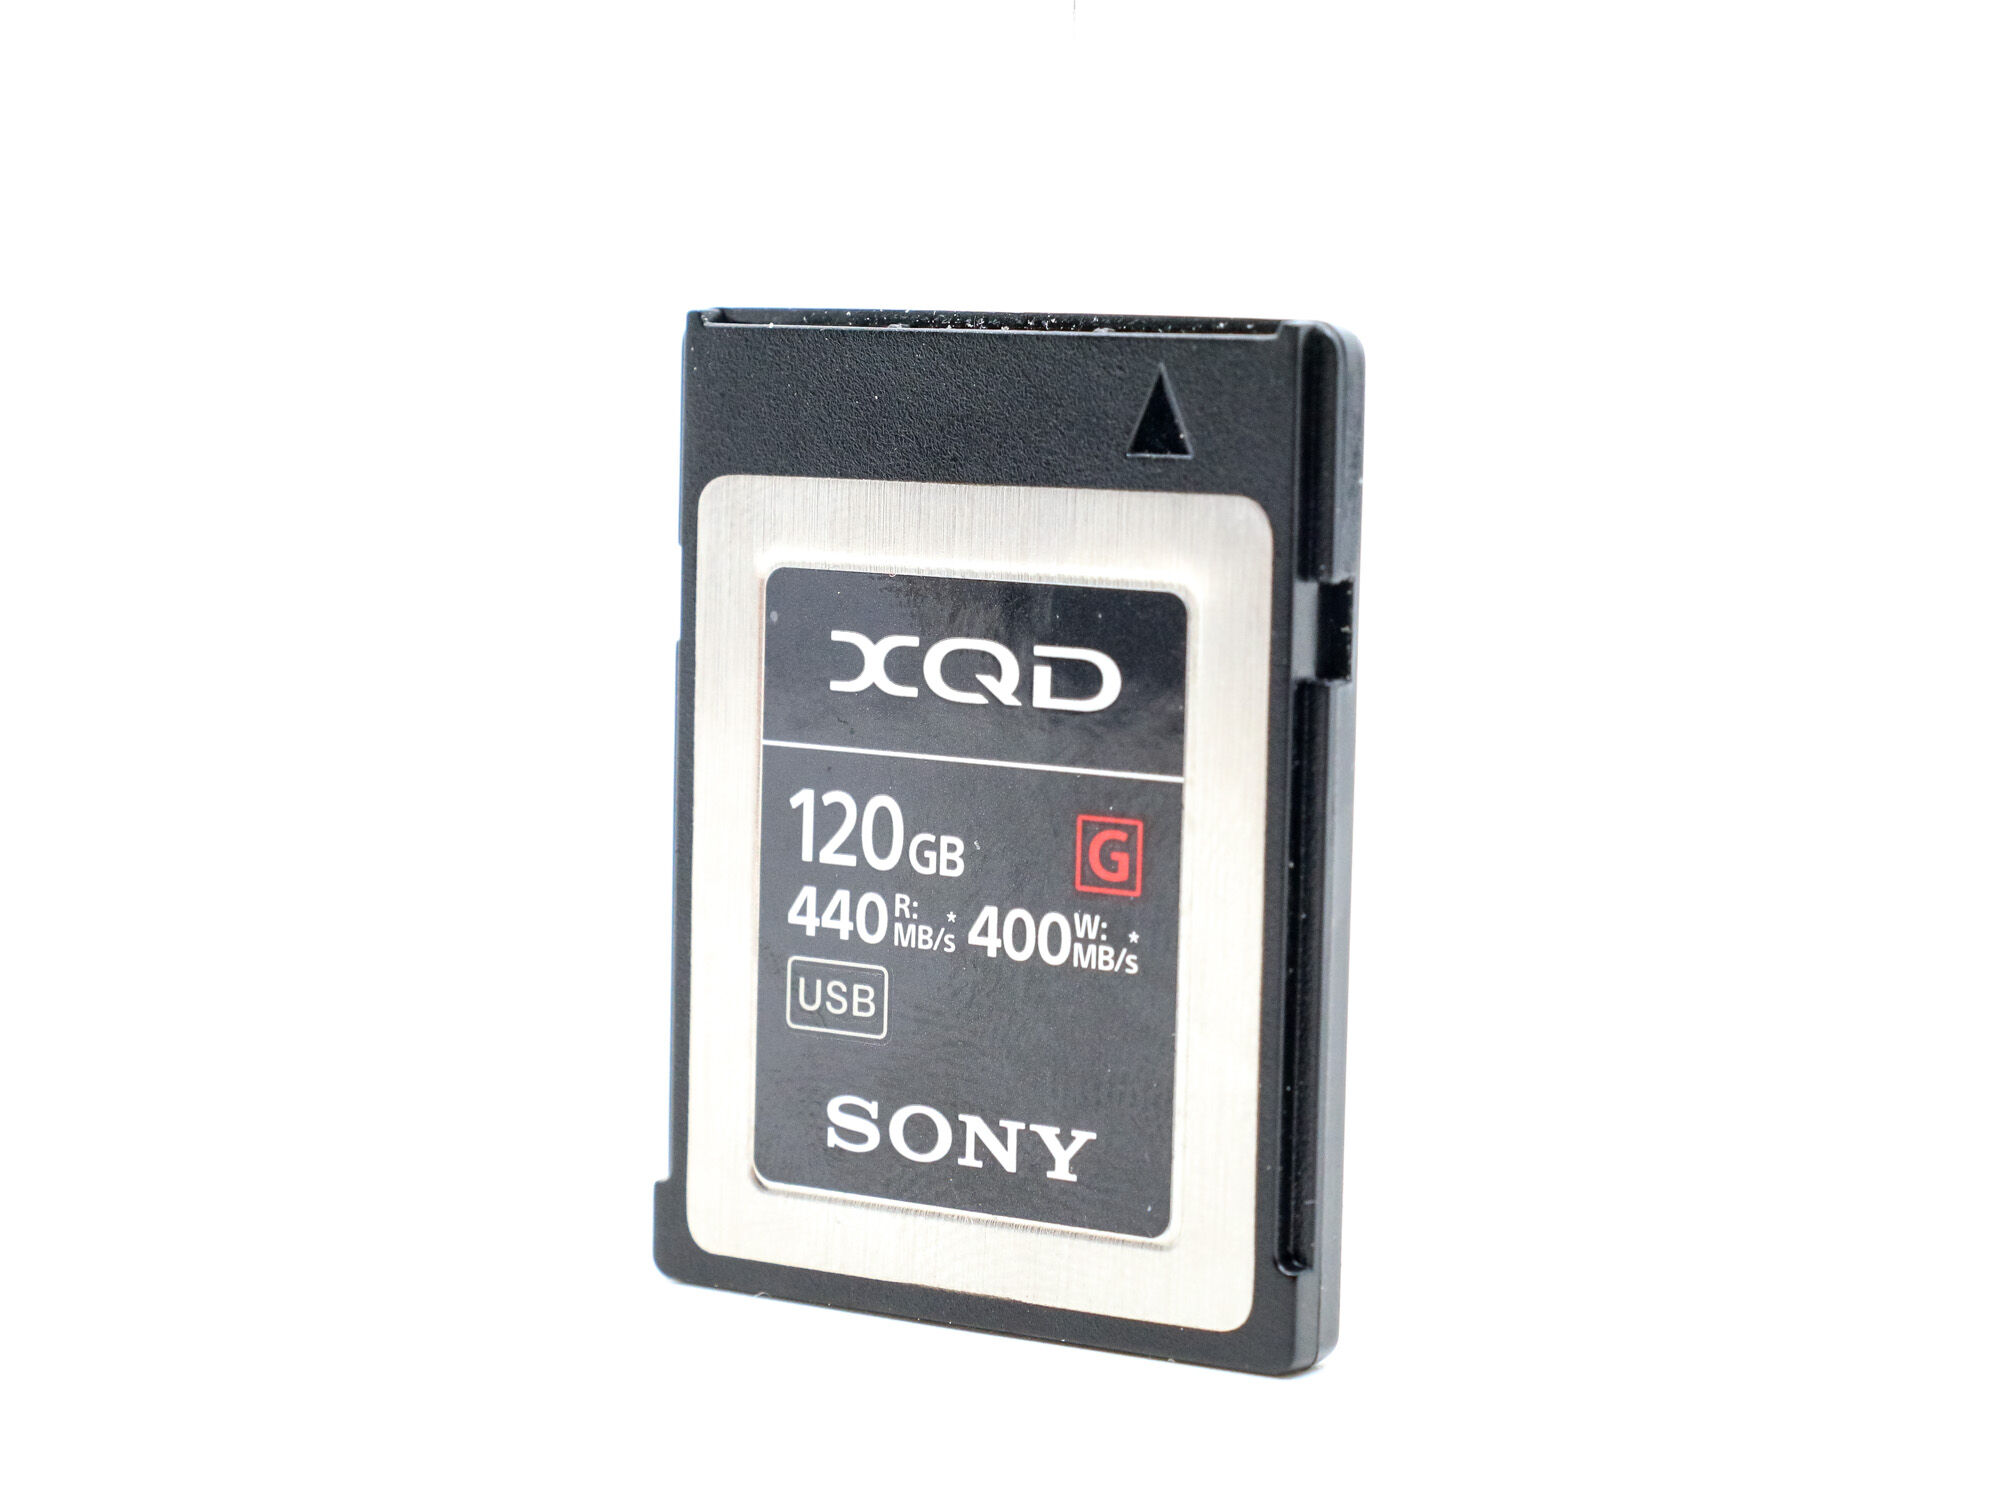 Sony XQD G 120GB 440MB/s Card (Condition: Excellent)